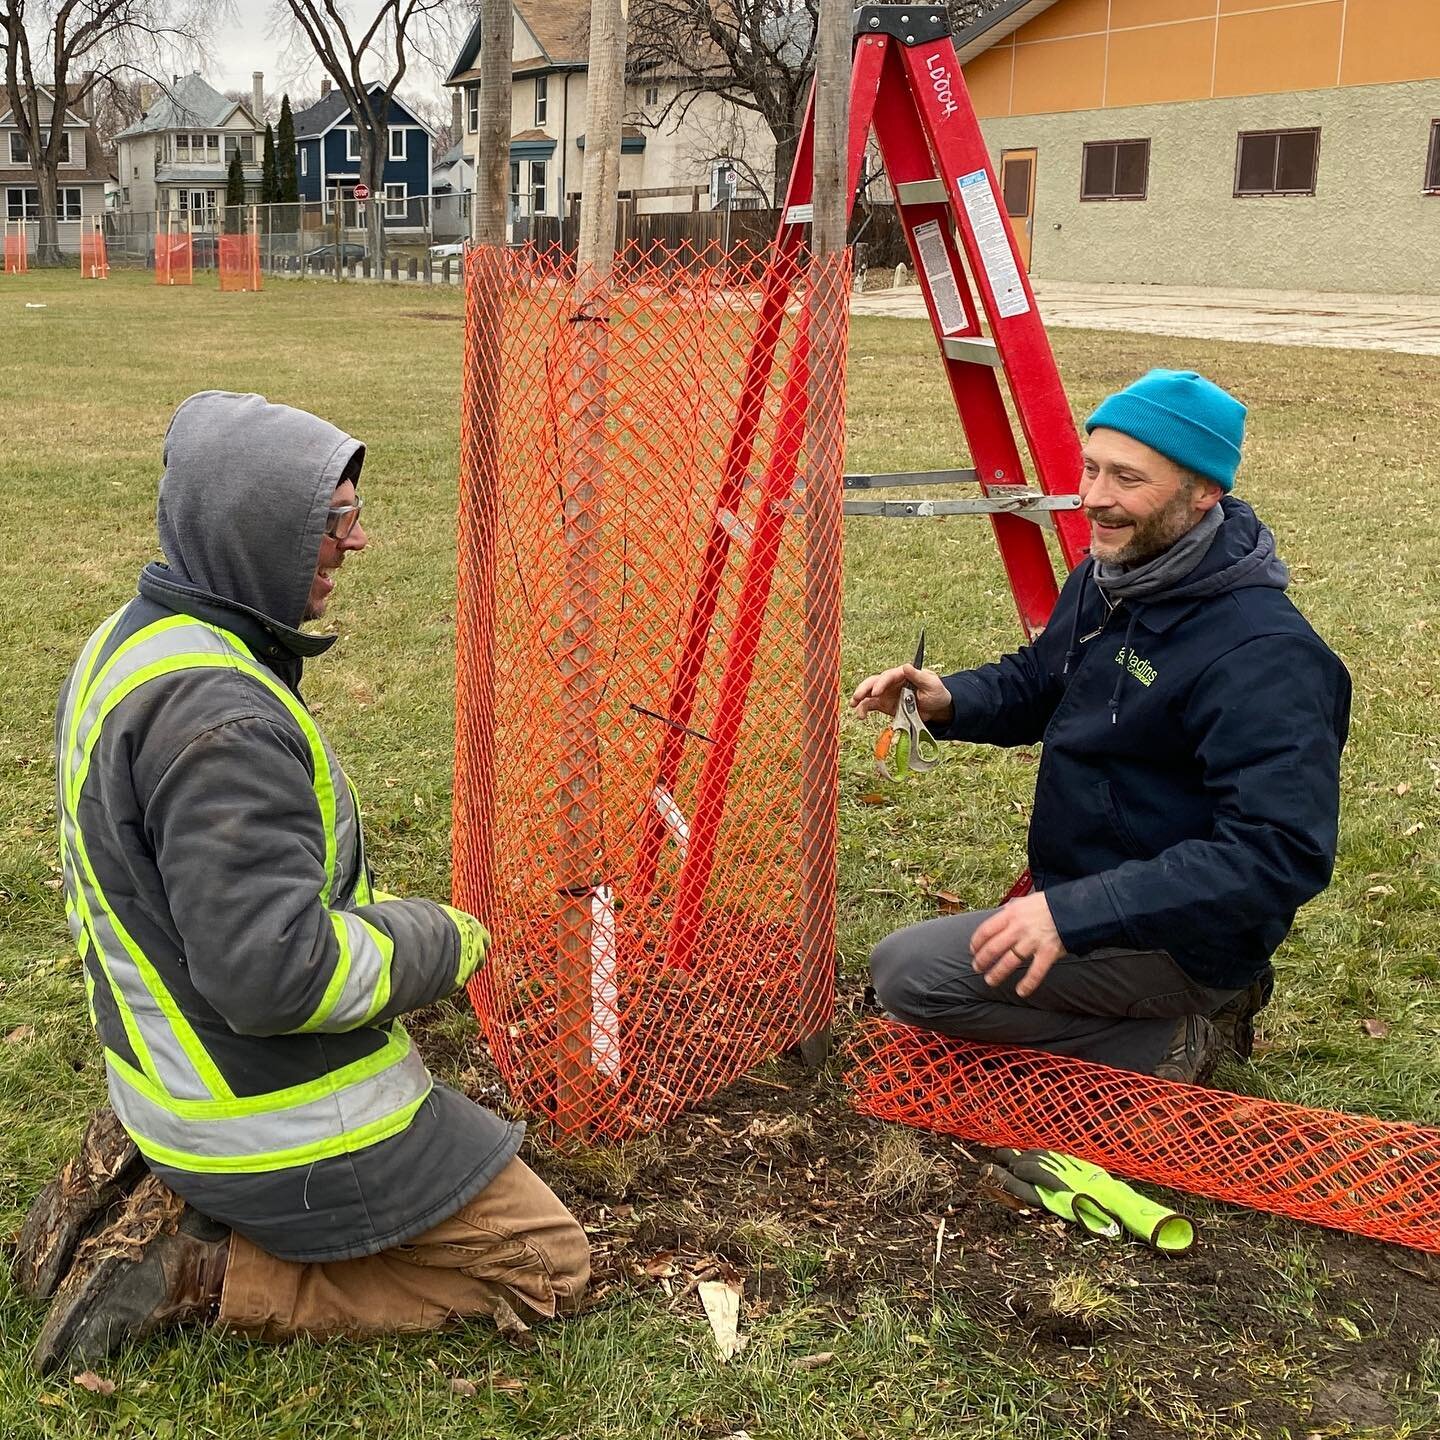 Some winter protection for newly planted trees is a good idea. Instead of metal T-posts and wire mesh we went for wooden stakes and plastic winter fencing. Not just protecting the trees but kids running through Isaac Brock field. Way to go @svrawinni